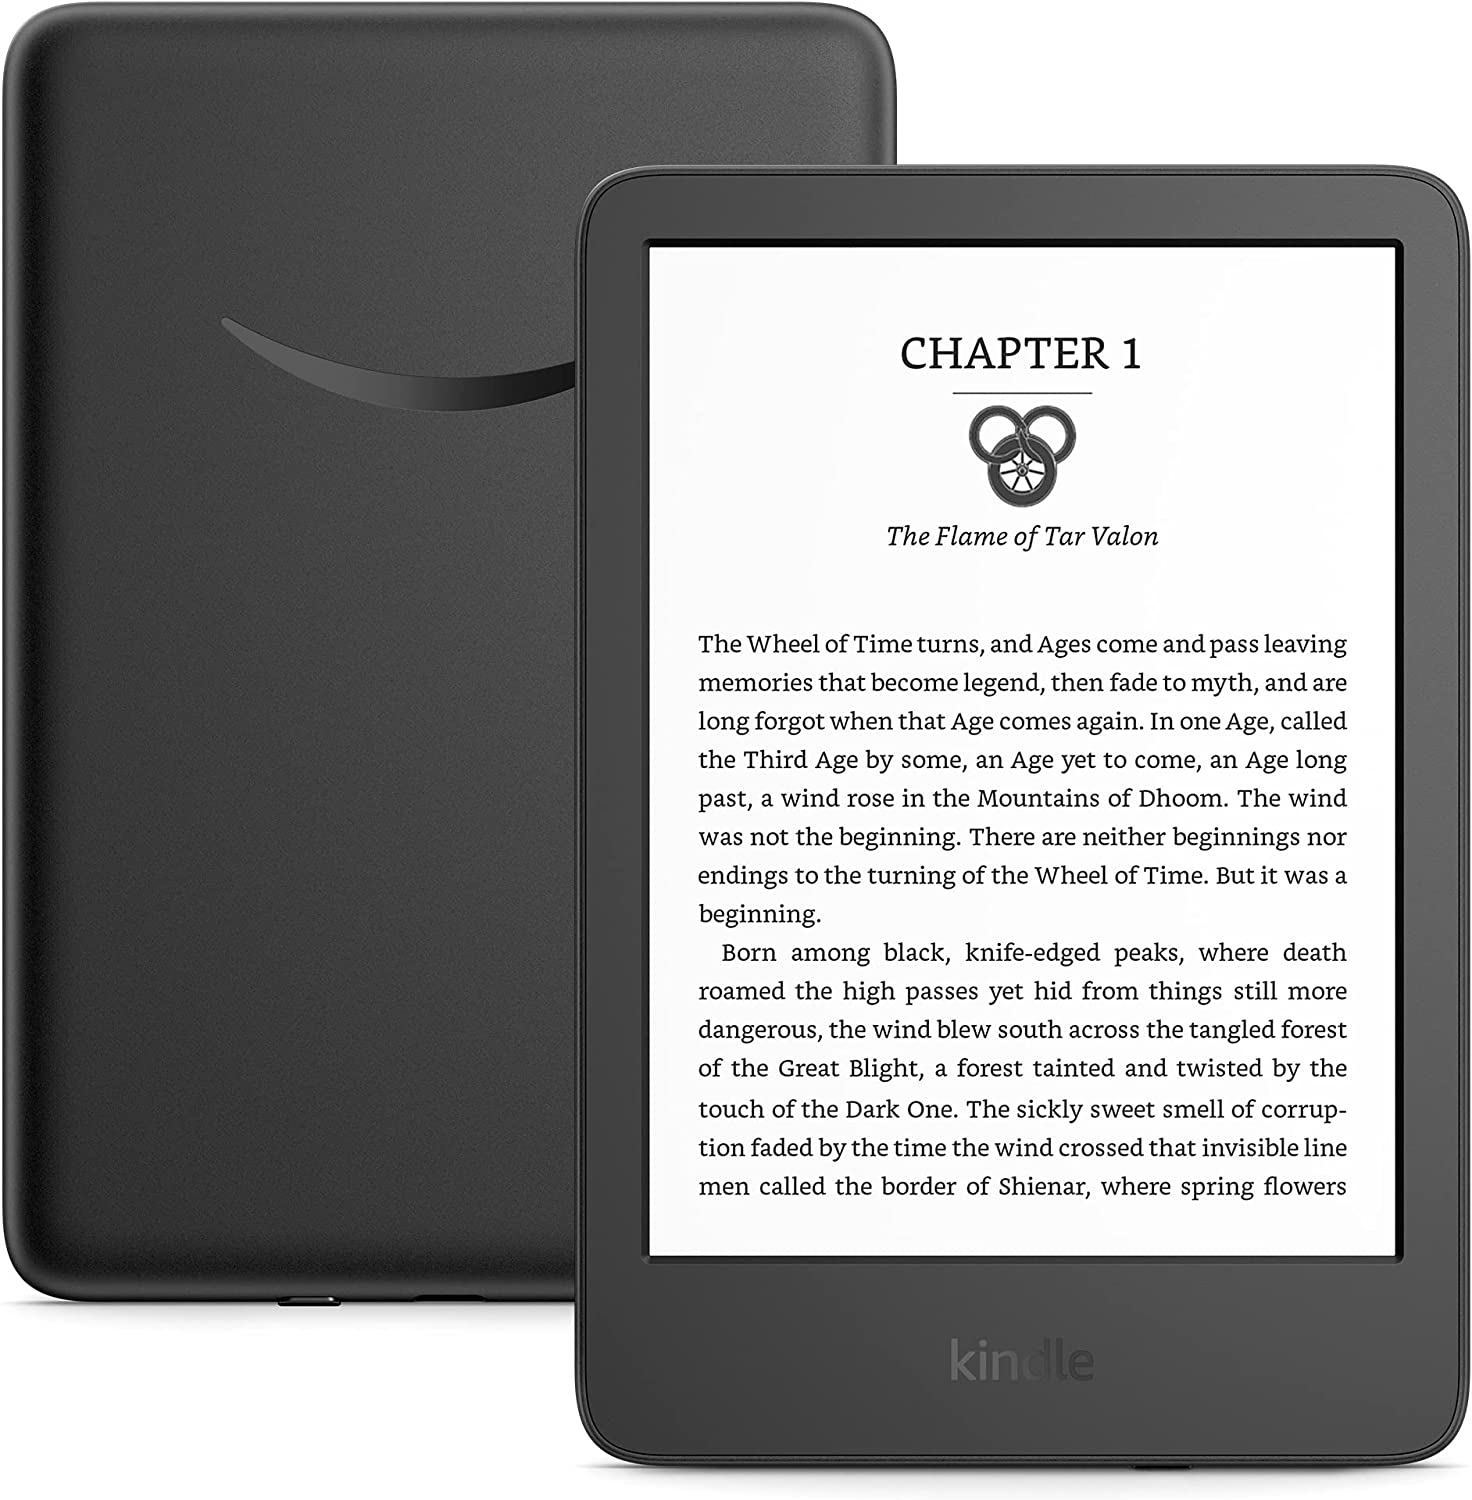 New Kindle Software 5.15.1.1 Now Available to Download